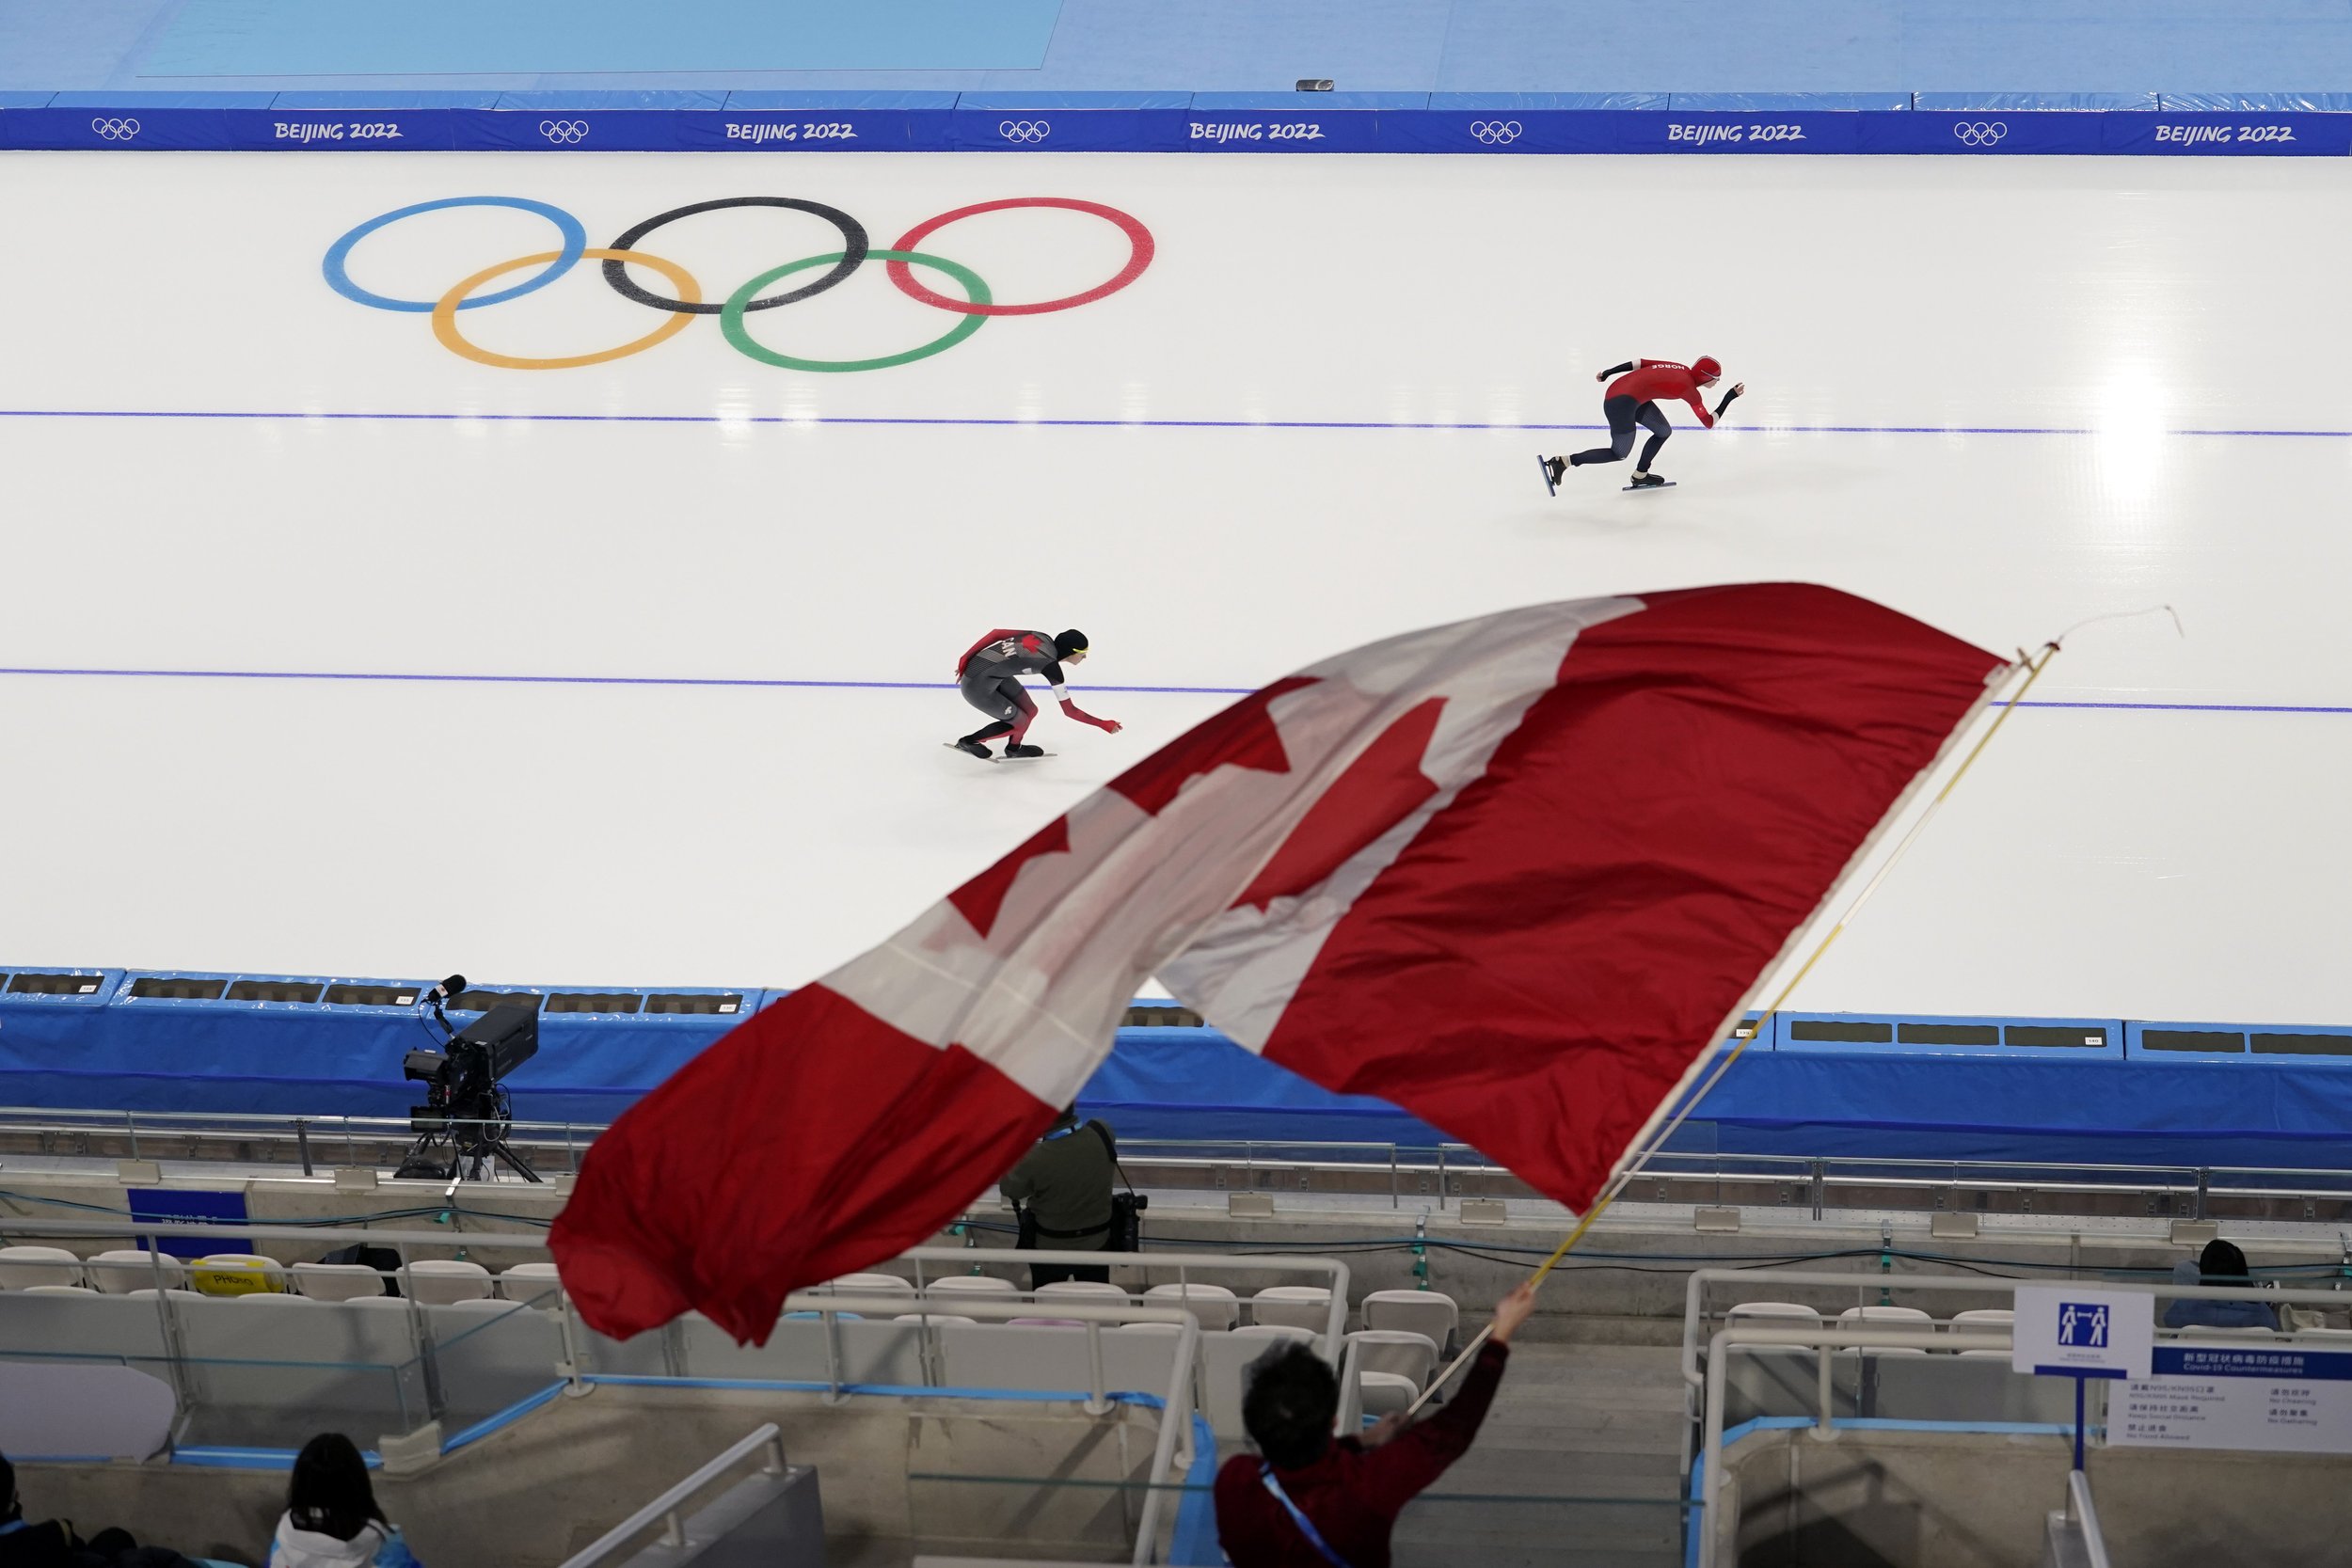  Isabelle Weidemann of Canada, let, competes against Ragne Wiklund of Norway, as a spectator waves a Canadian flag, during the women's speedskating 5,000-meter race at the 2022 Winter Olympics, Thursday, Feb. 10, 2022, in Beijing. (AP Photo/Ashley La